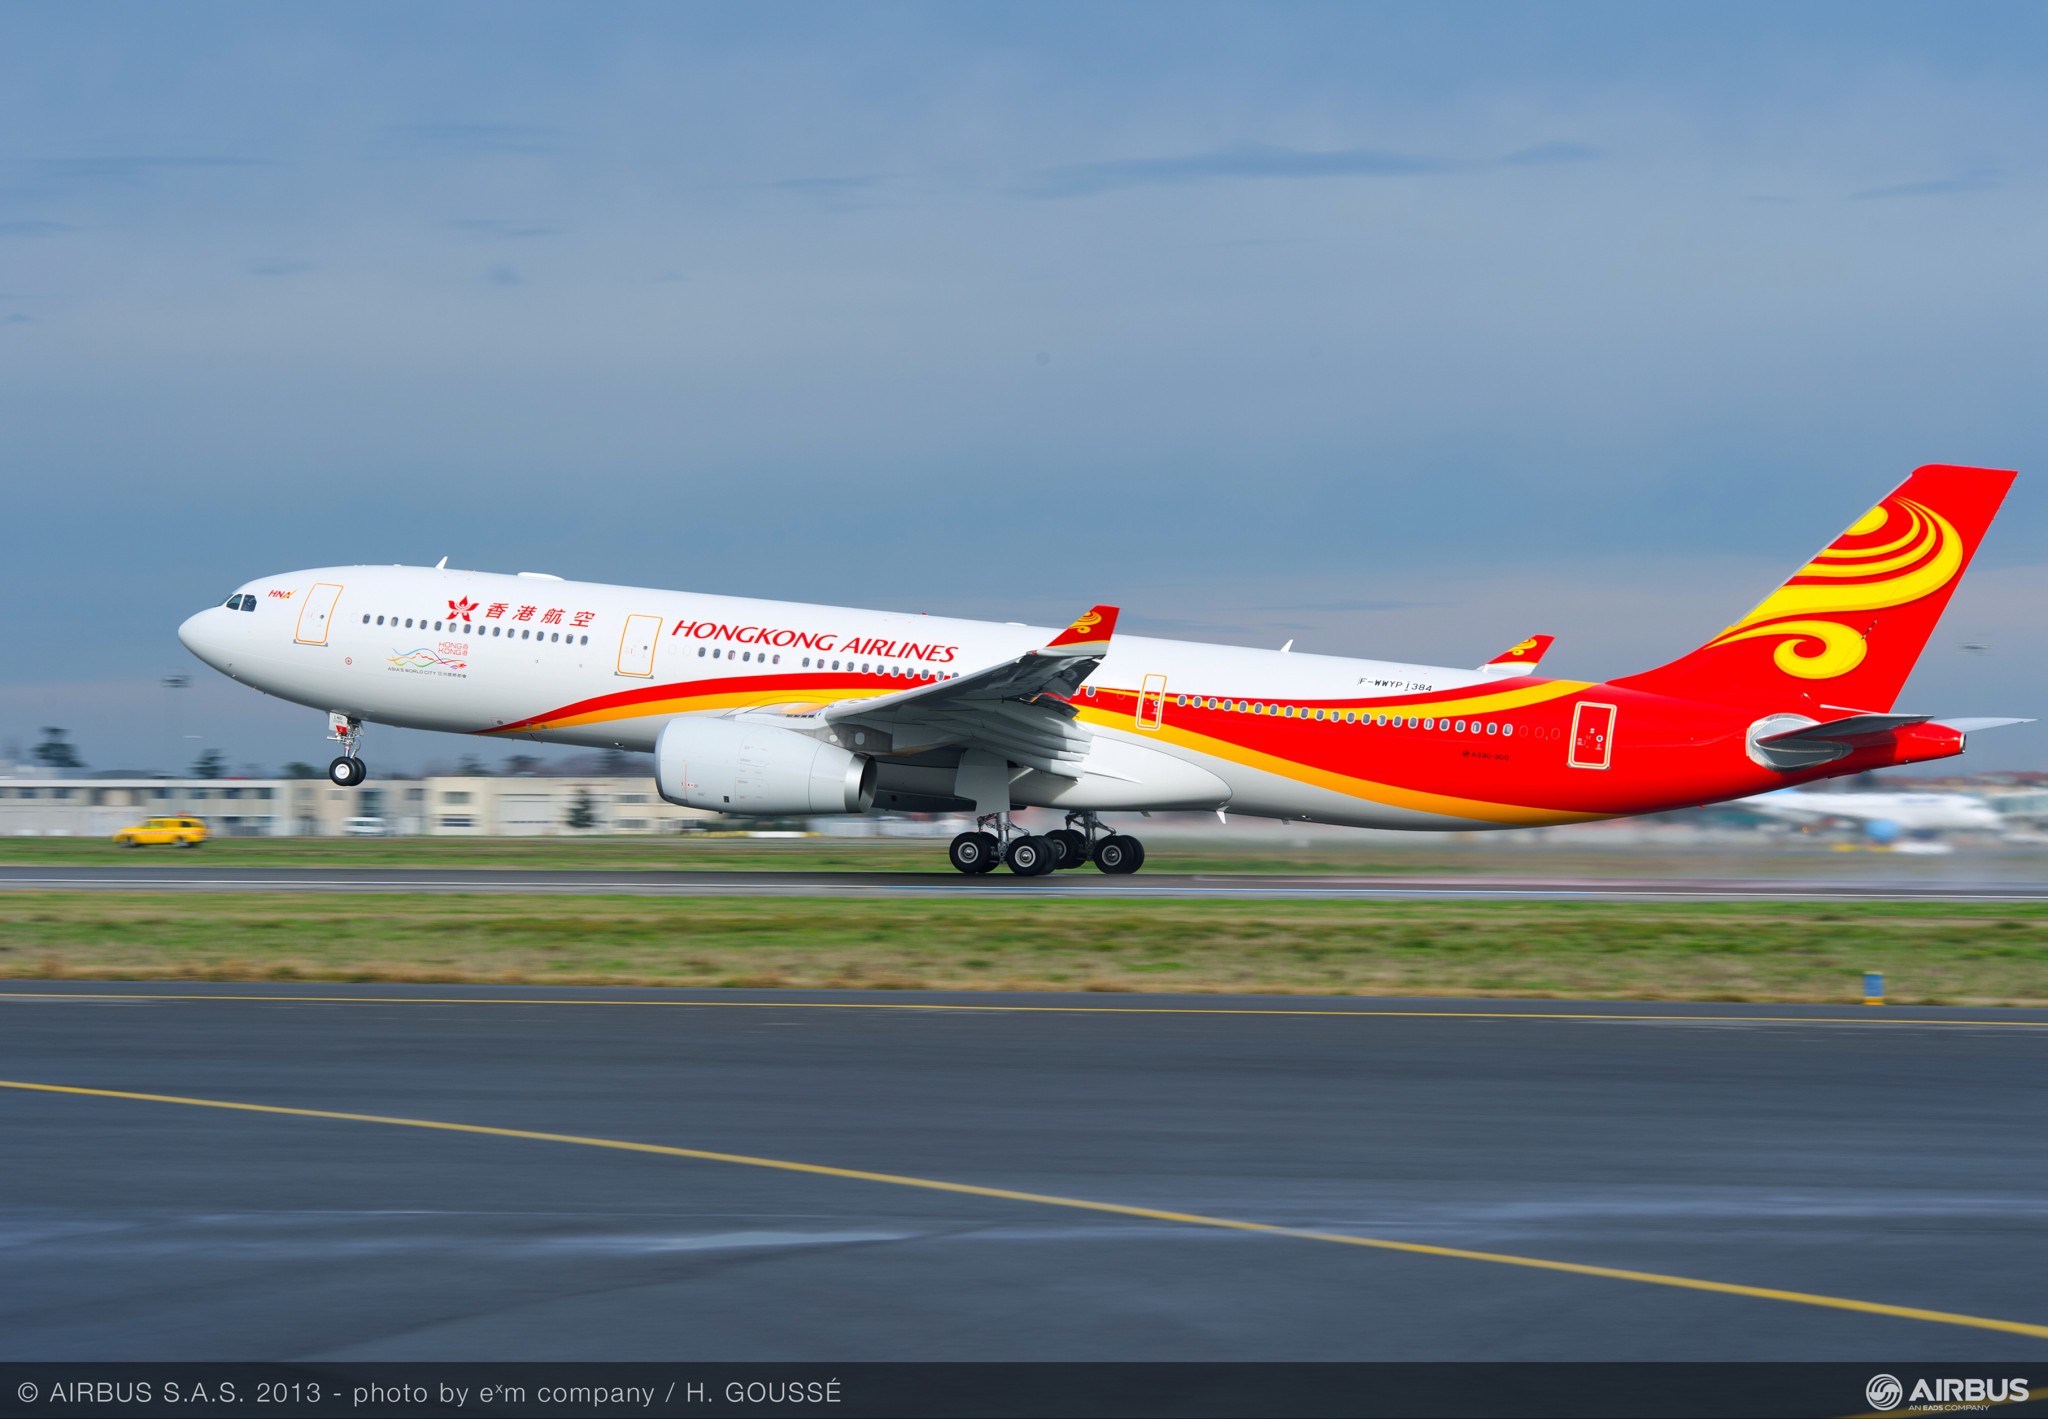 Hong Kong Airlines wins court approval for $6 billion restructuring debt